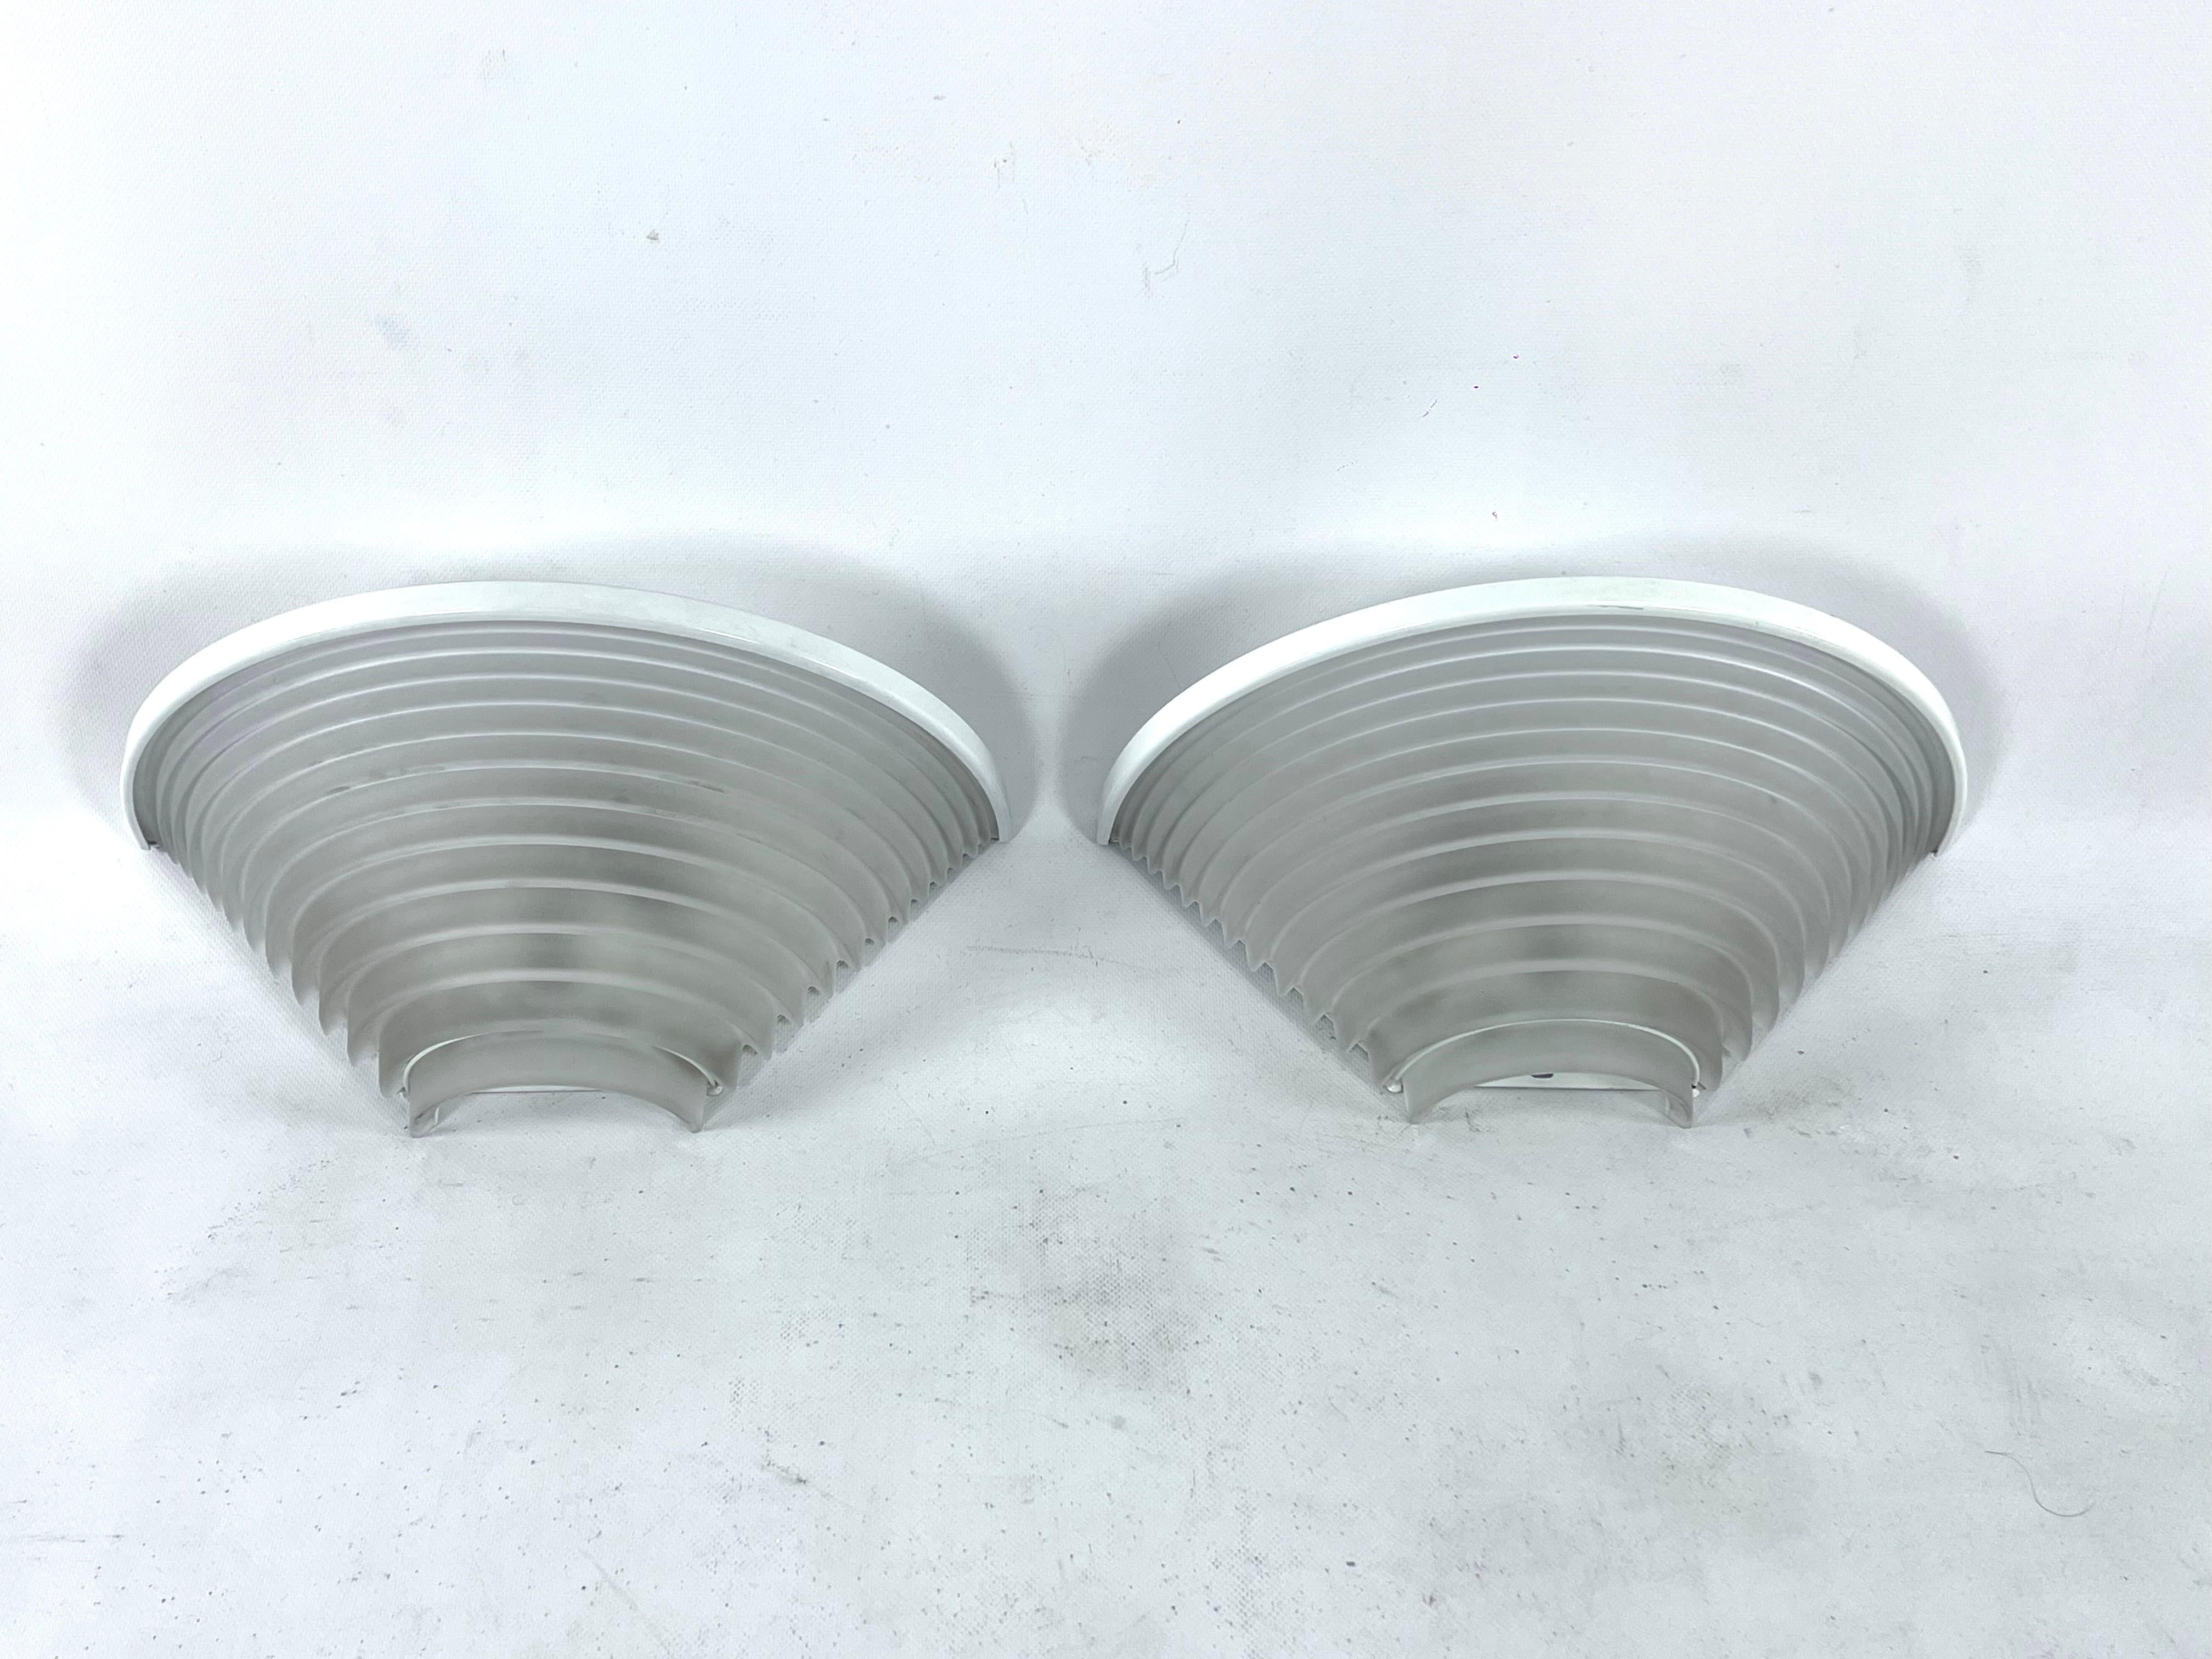 Great vintage condition with normal trace of age and use for this set of two egisto 38 parete designed by the Italian architect Angelo Mangiatotti for Artemide and produced during the 1980s. Made from thick frosted glass shade on white metal frame.